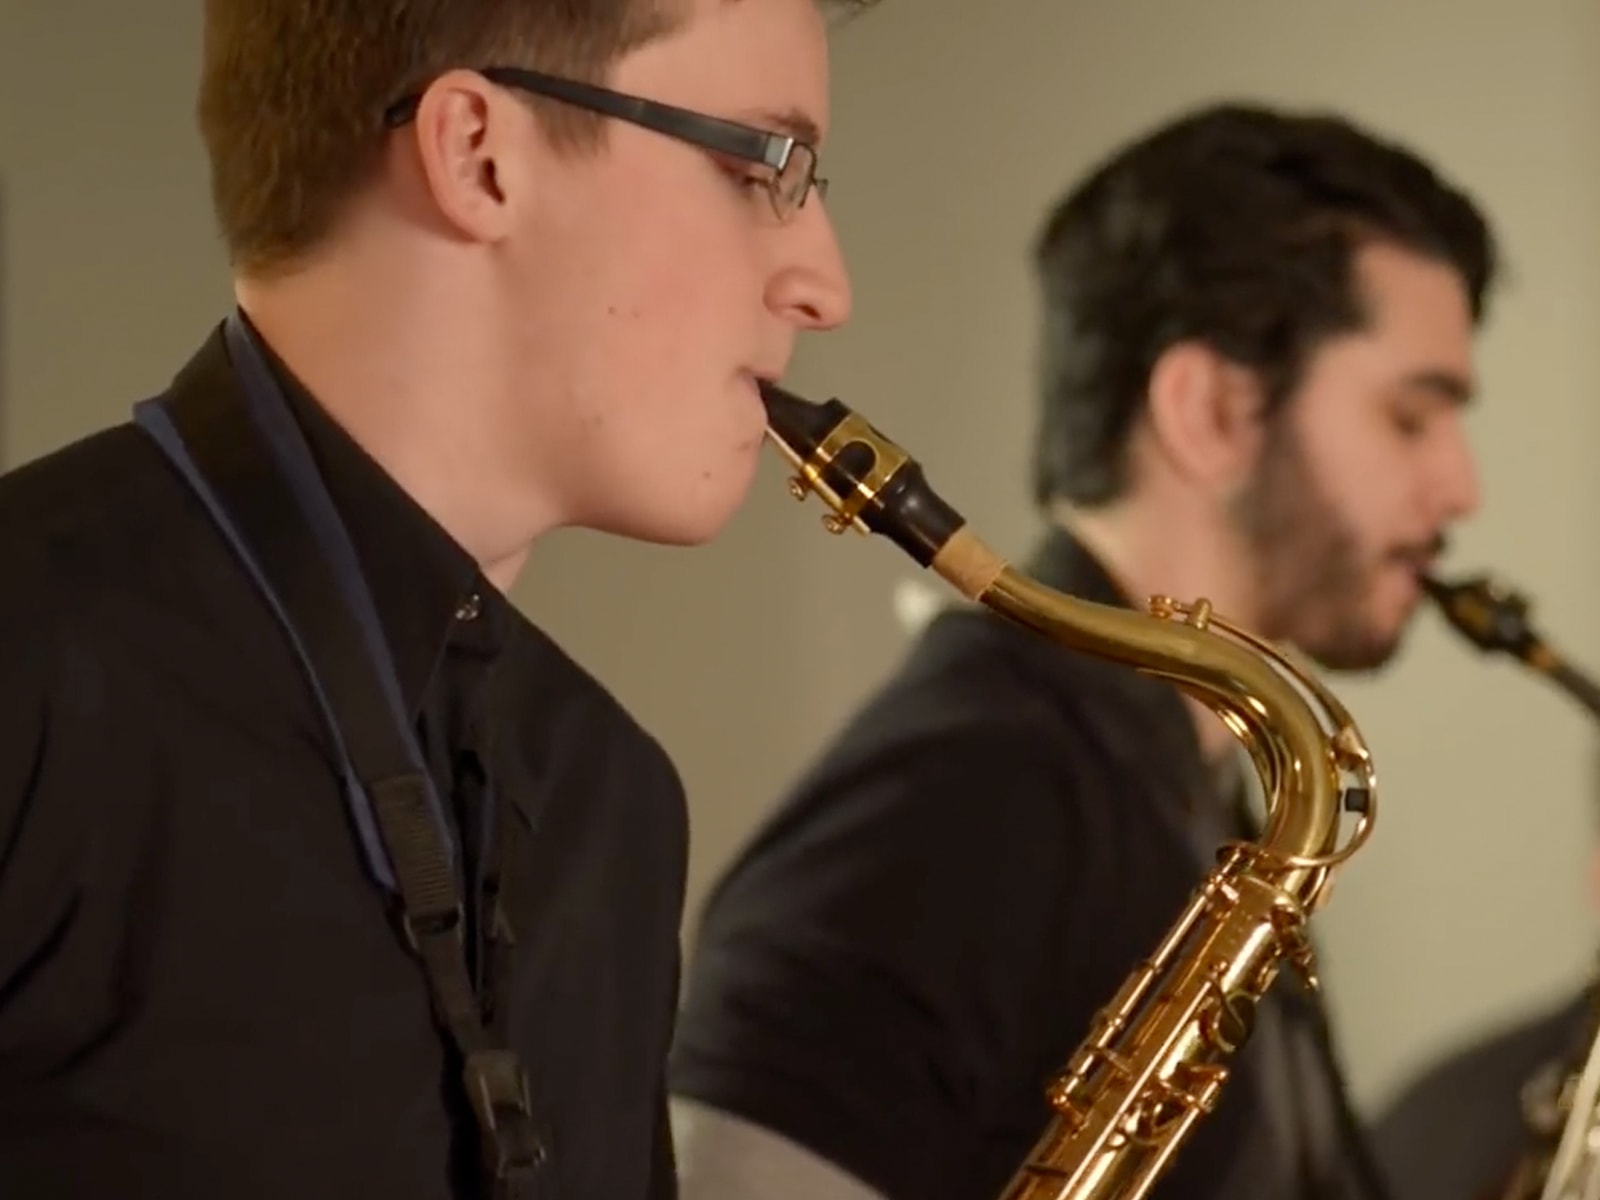 Screenshot from the DigiPen Jazz video All Good, featuring students playing saxophones